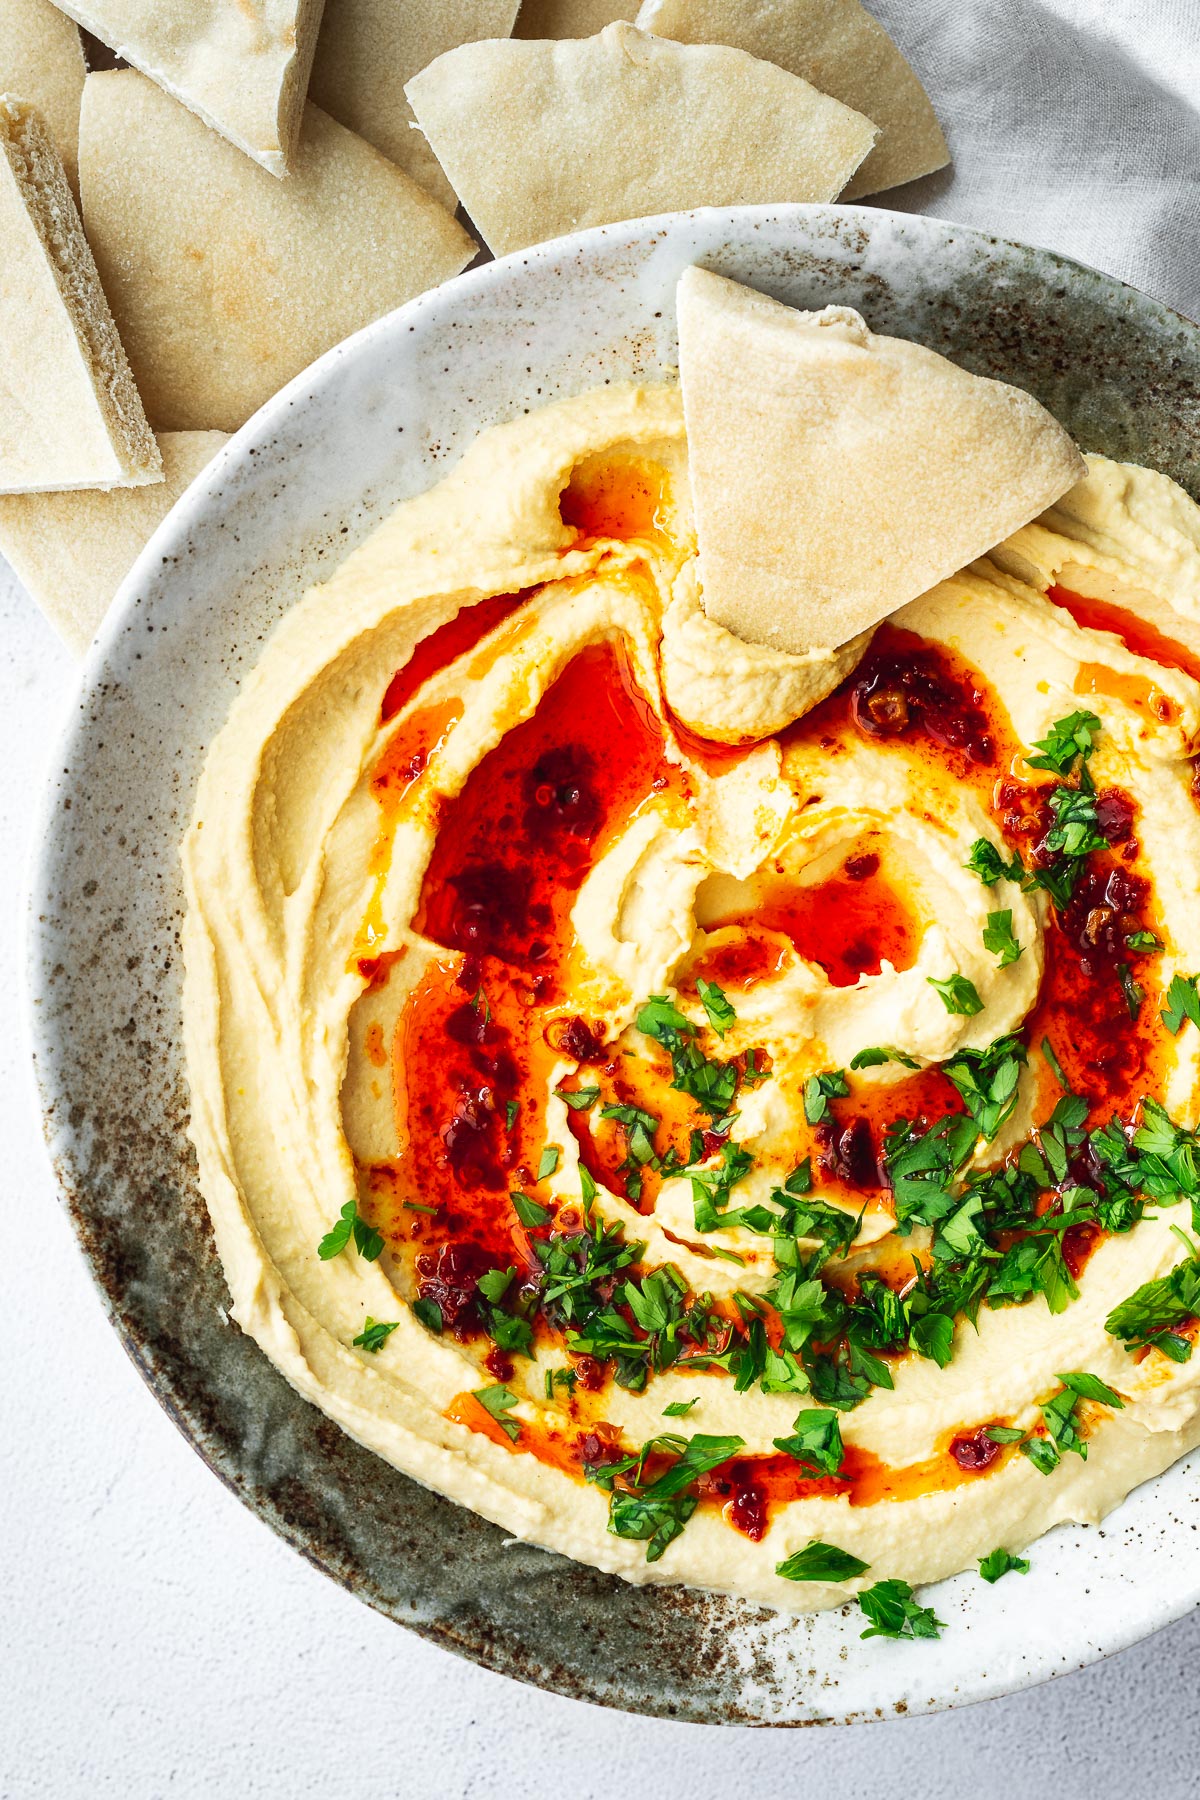 Top down view of a bowl of hummus with pita triangles.